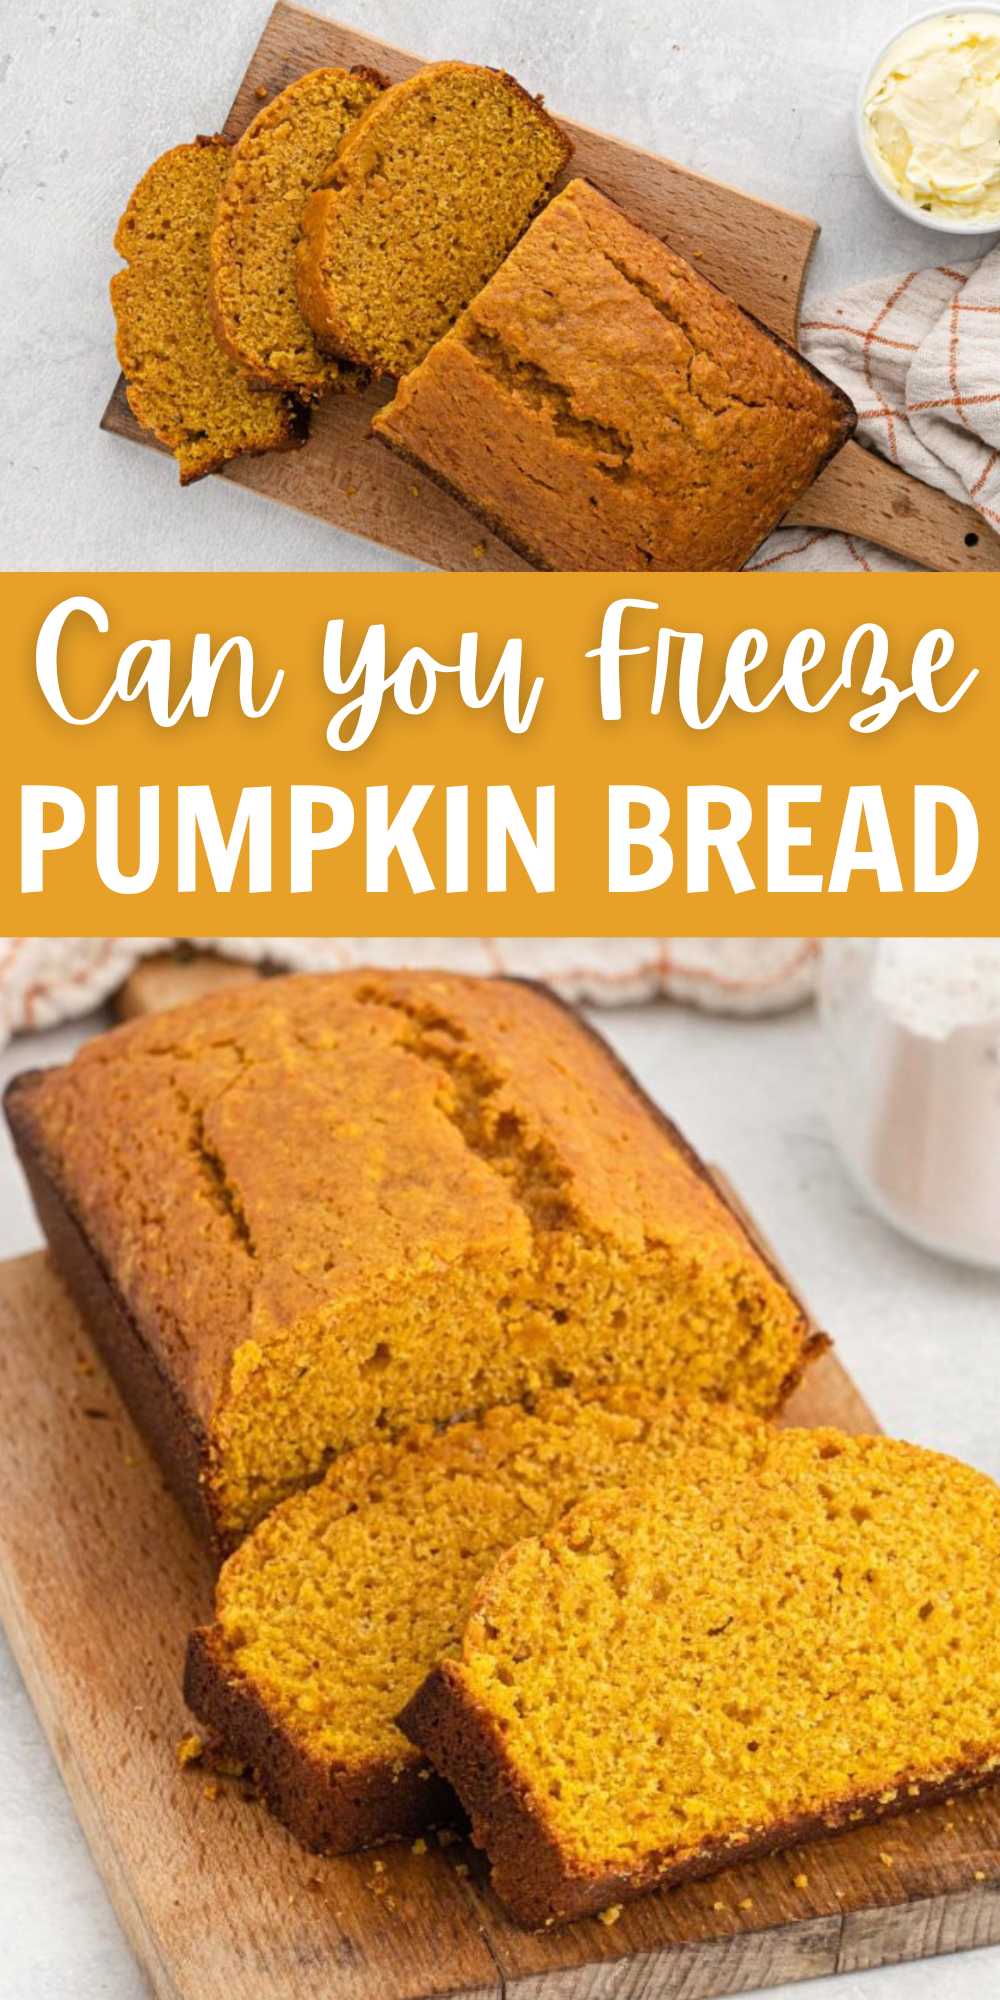 If you are wondering, Can you Freeze Pumpkin Bread. These tips and tricks will help you save that leftover pumpkin bread. If you enjoy baking homemade pumpkin bread. Freezing it allows you to have your own delicious bread ready to enjoy at any time. Without the need to bake from scratch every time you crave it. #eatingonadime #canyoufreezepumpkinbread #pumpkinbreadfreezertips